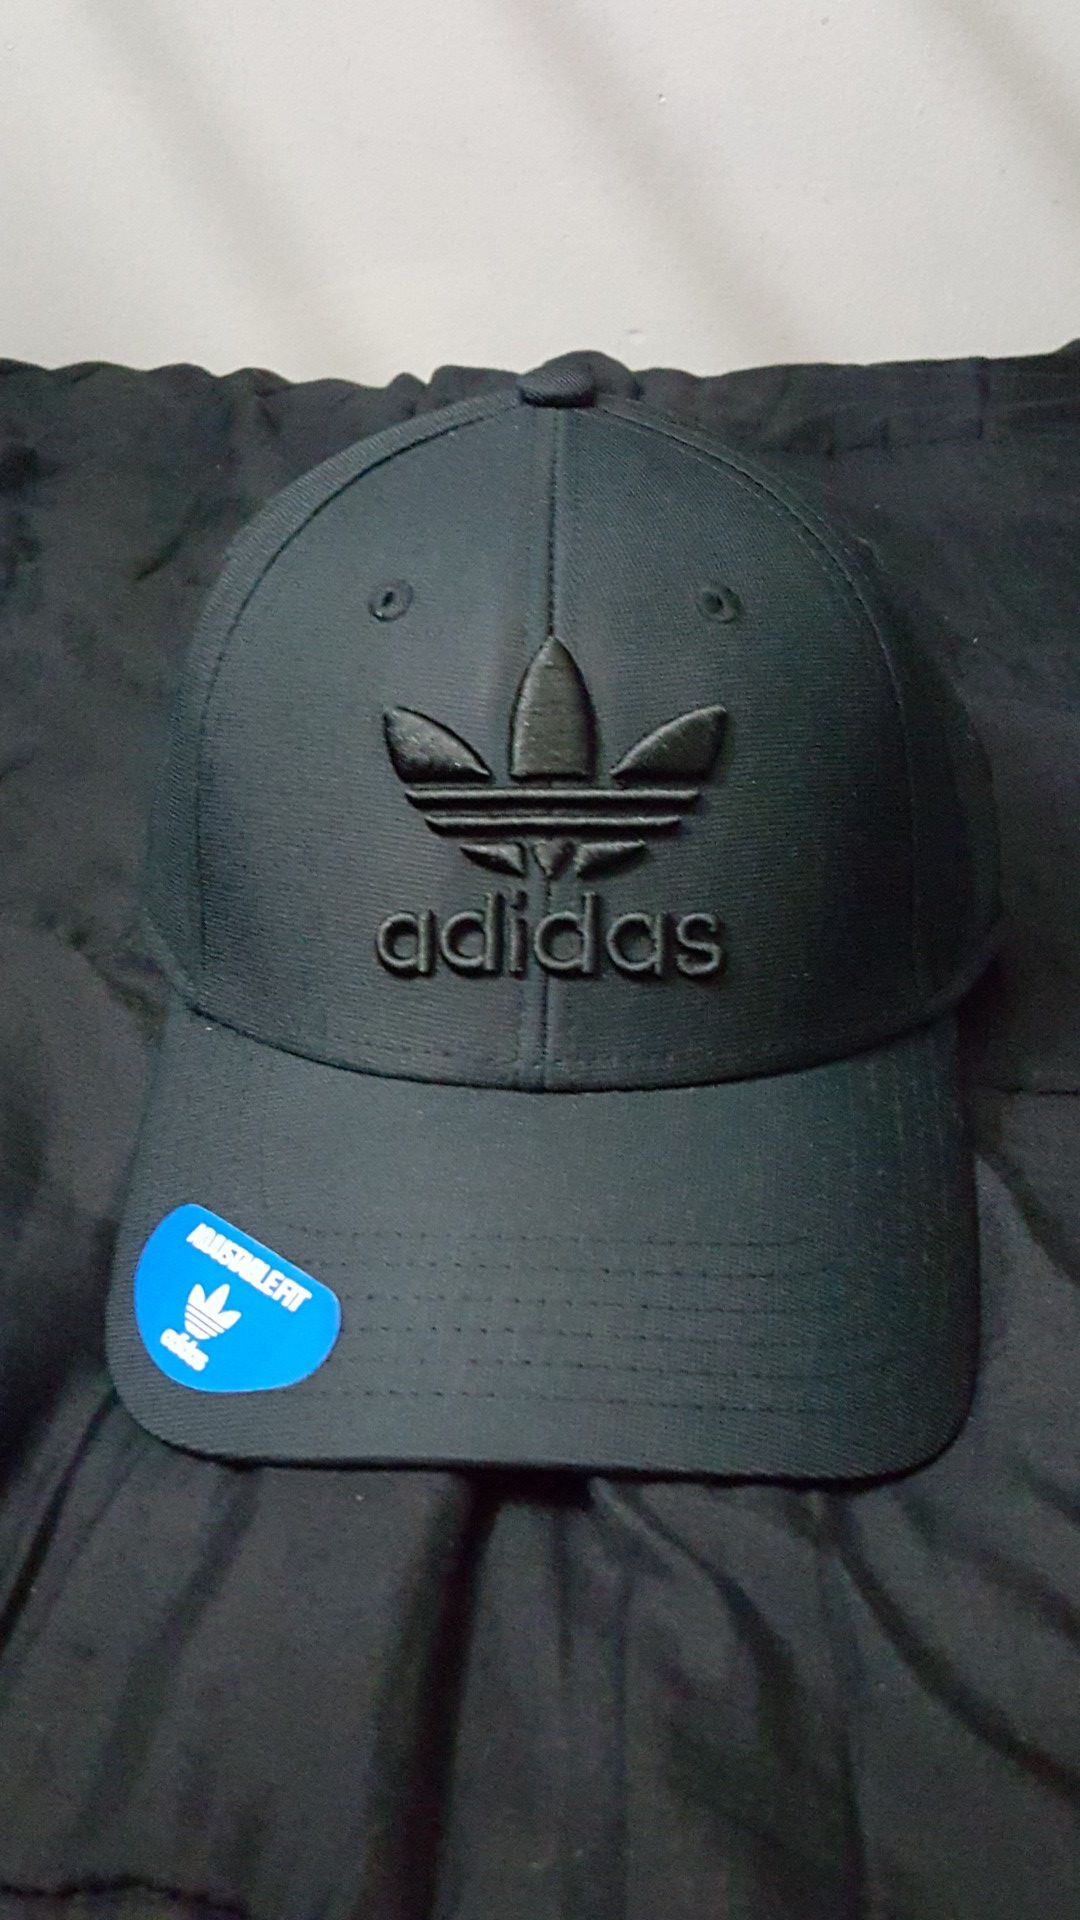 ADIDAS HAT ADJUSTABLE SNAP BACK CLIP ALL SIZES FITS ALL LIMITED EDITION DARK BLACK BRAND NEW WITH TAGS SERIOUS BUYER'S MAKE ME AN OFFER